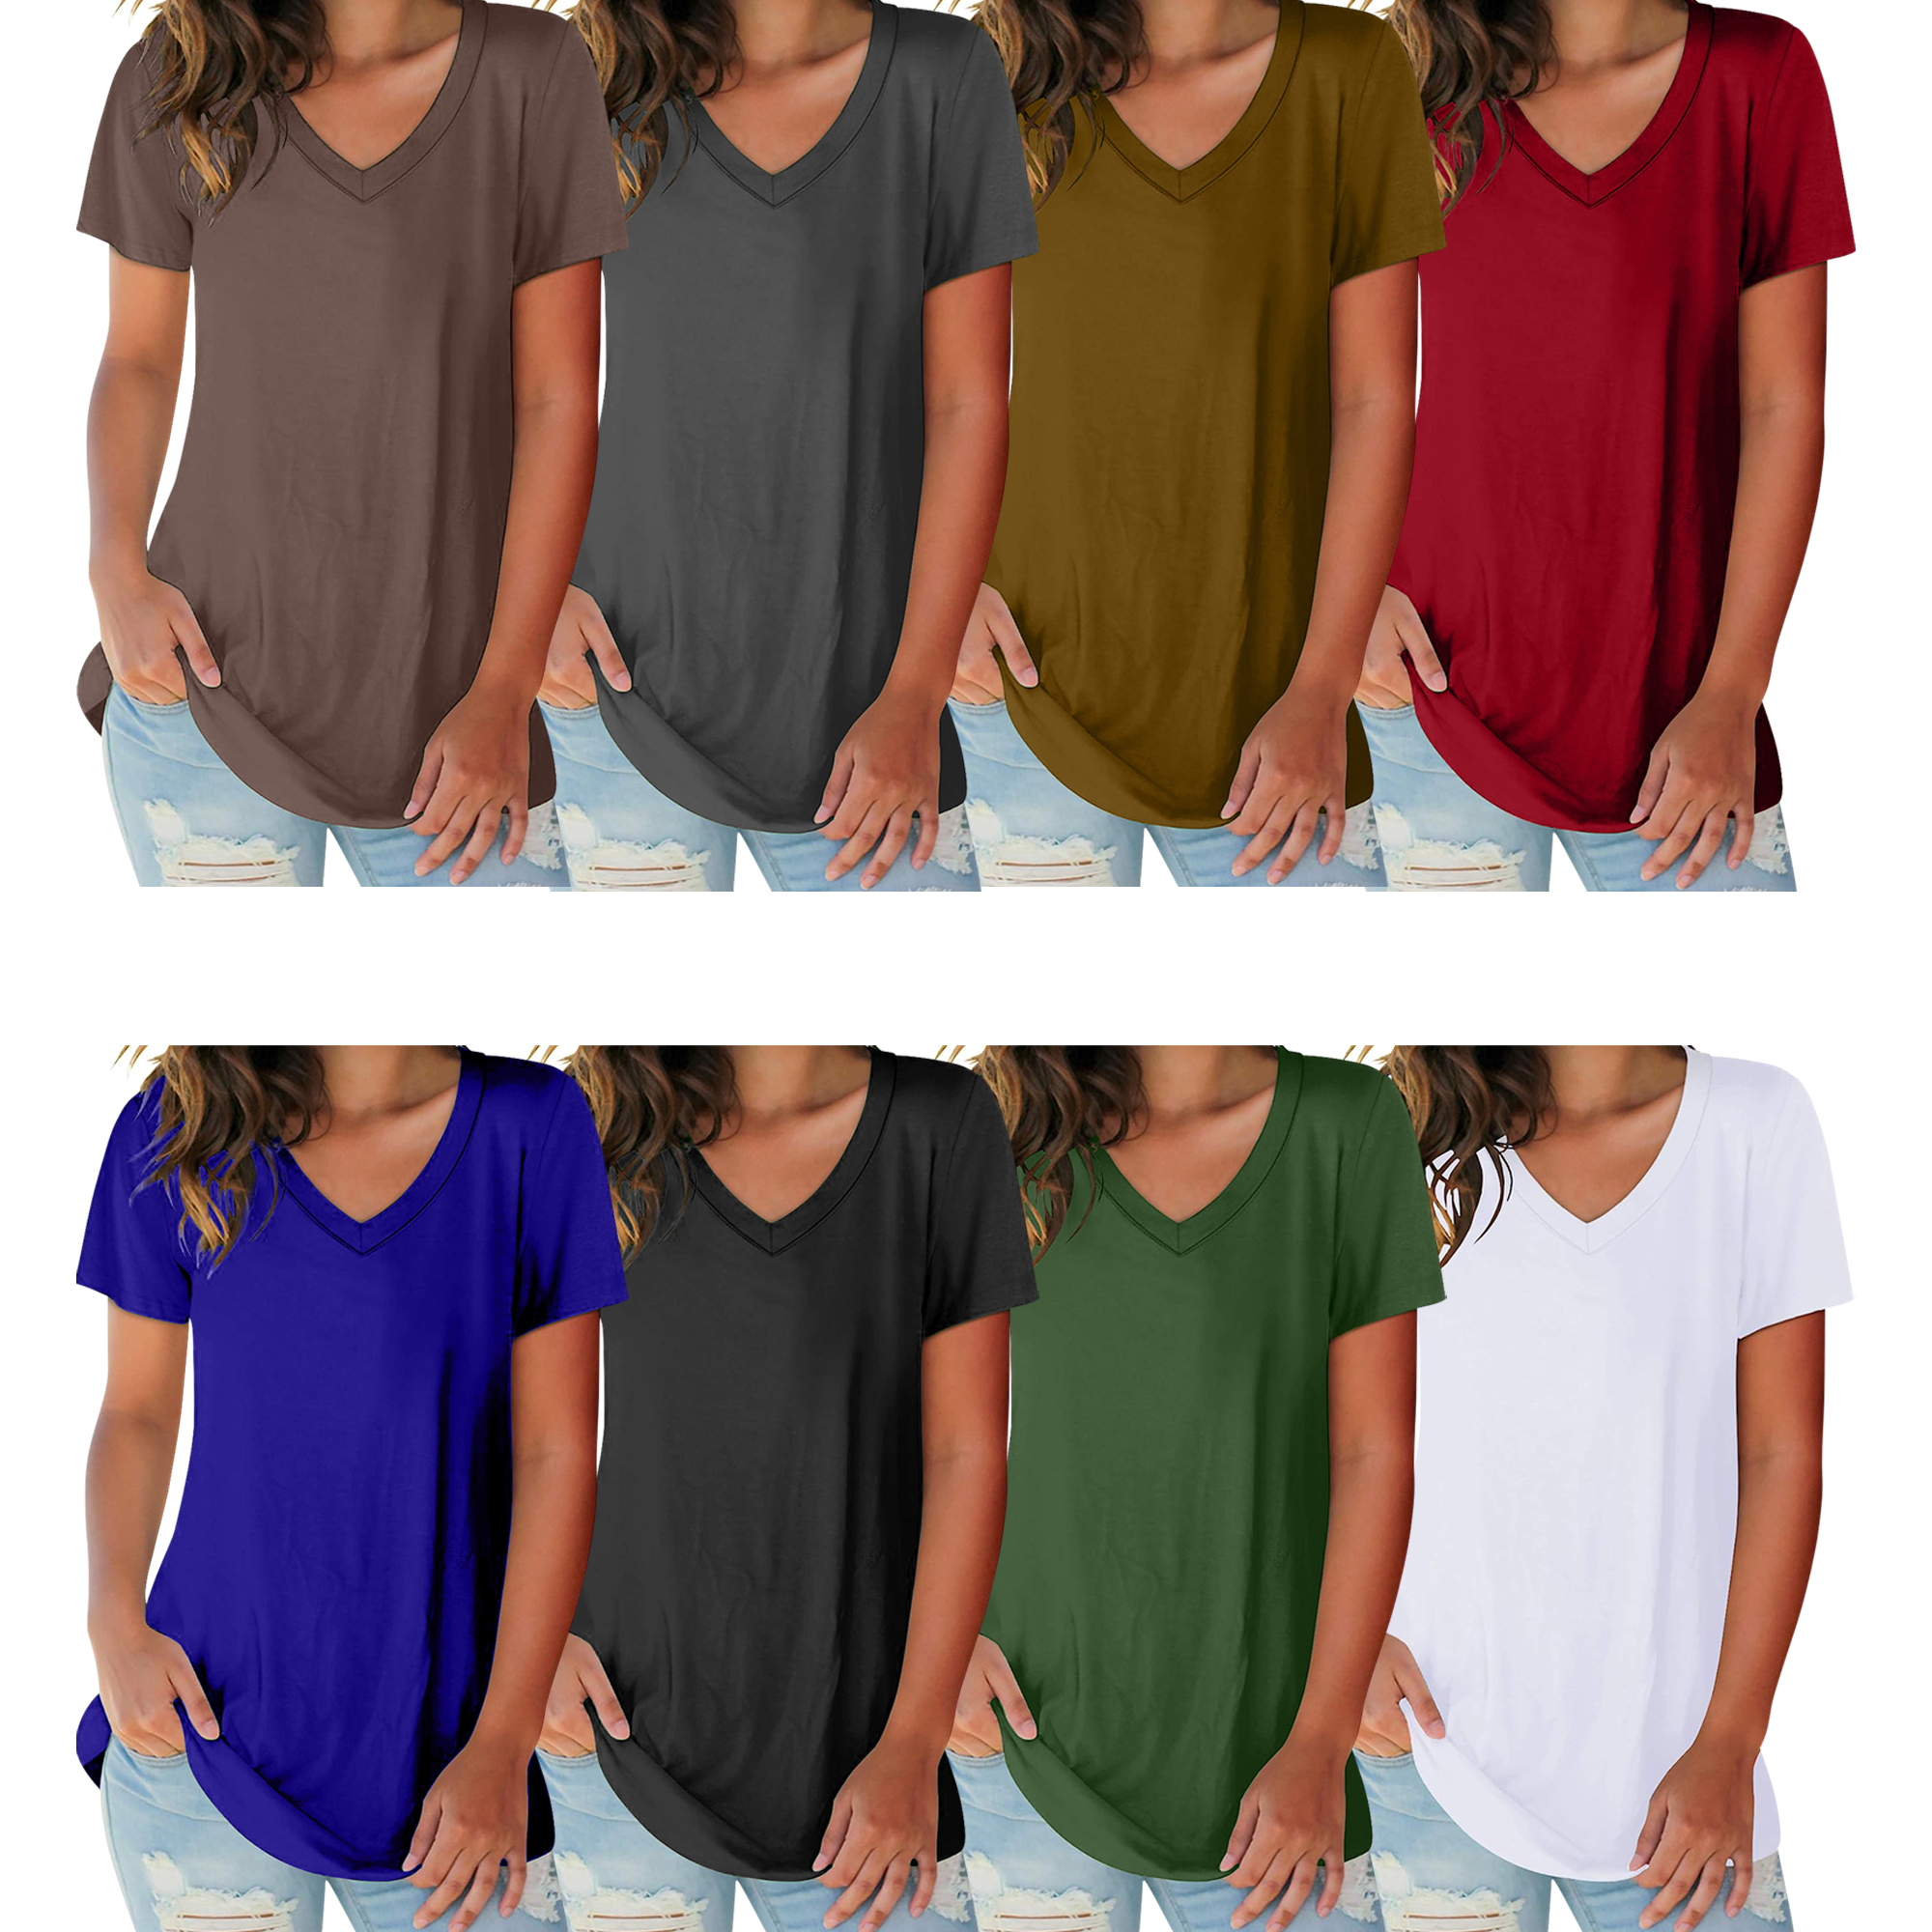 3-Pack Women's Solid V- Neck T-Shirts Soft Stretchy Athletic Moisture-Wicking Running Workout Yoga Tee Tops - M